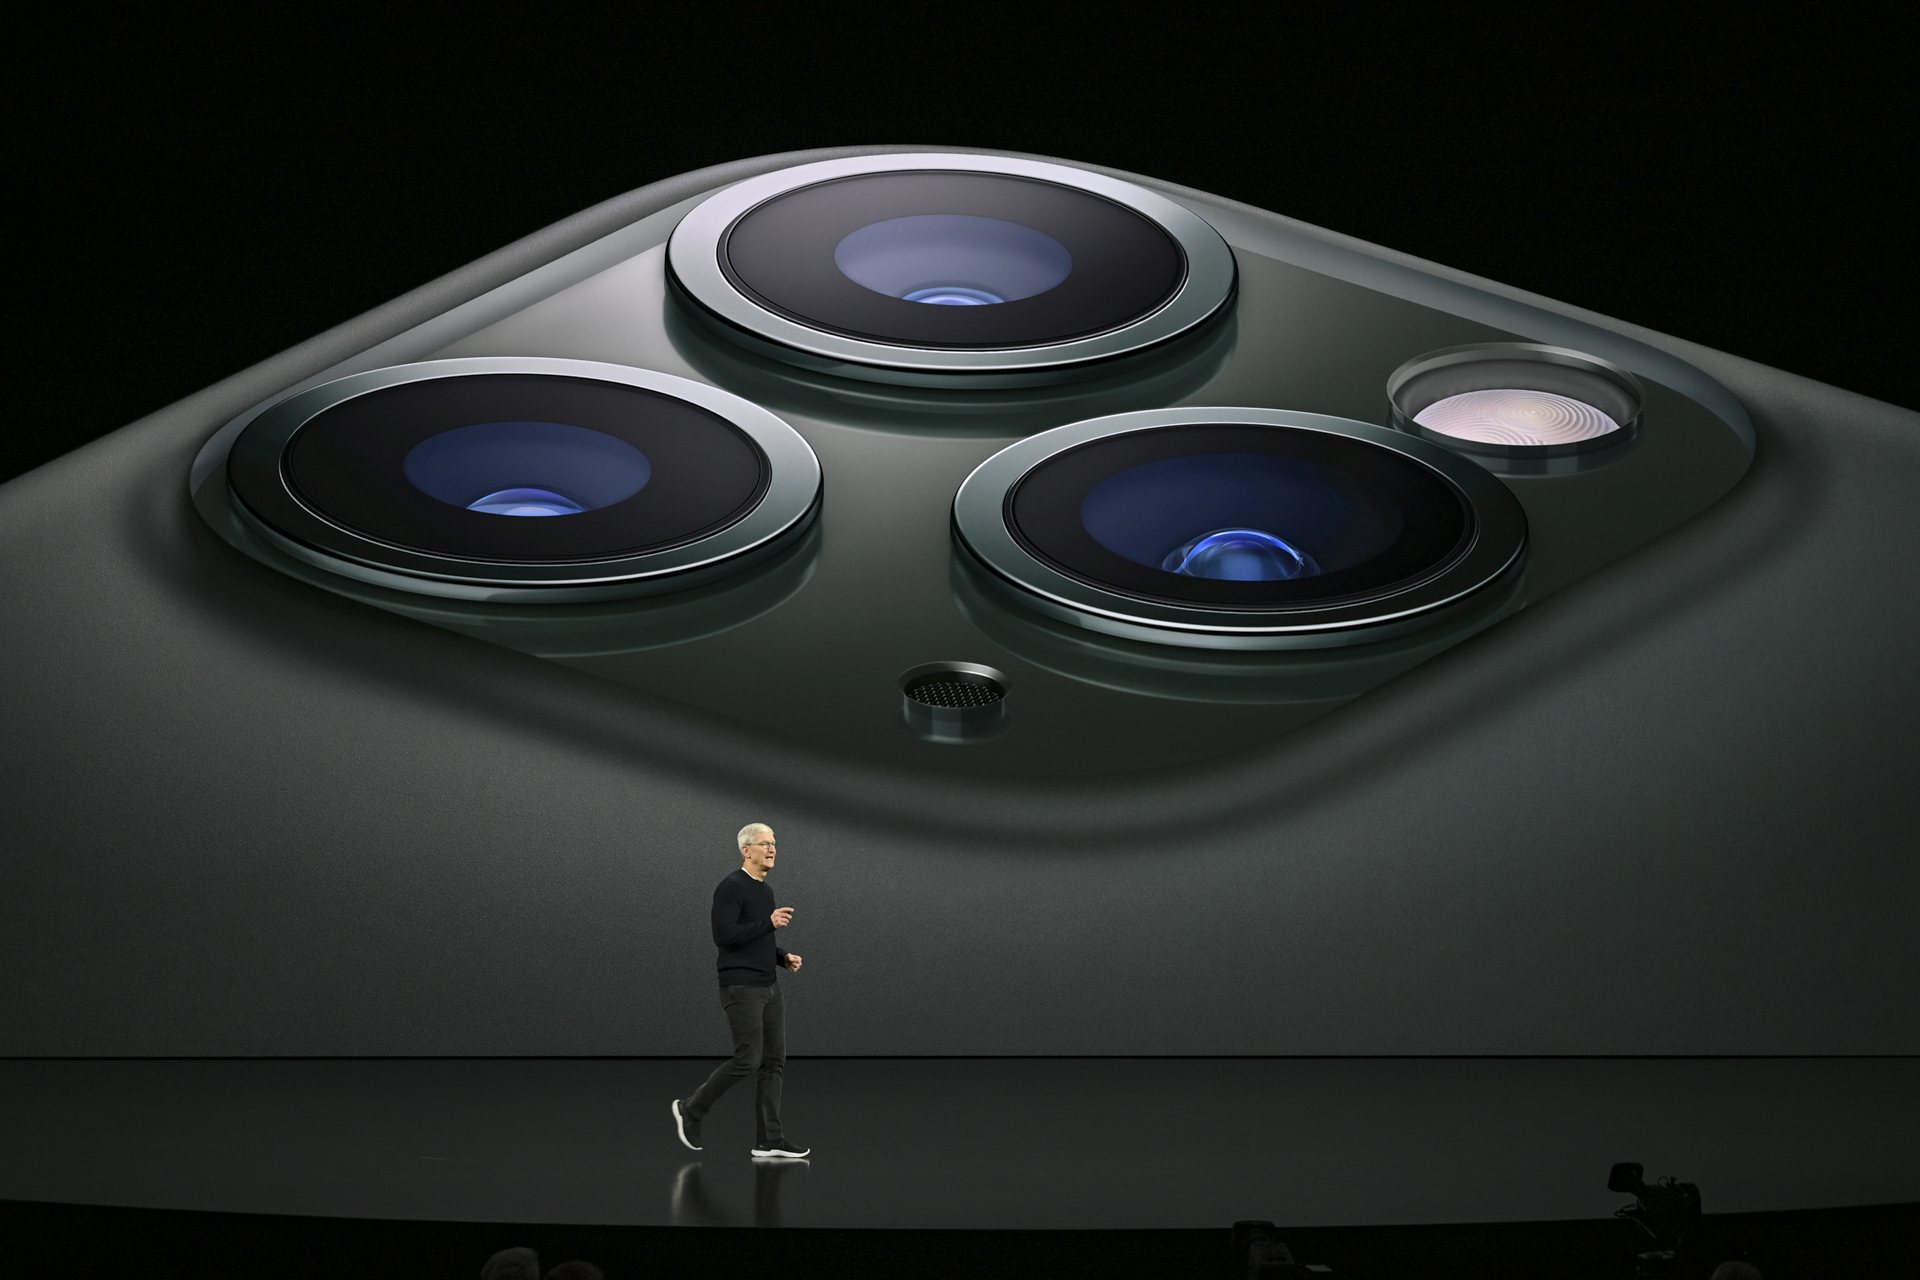 iPhone 11 Pro and Pro Max Camera Lenses | Apple September 2019 Event Keynote